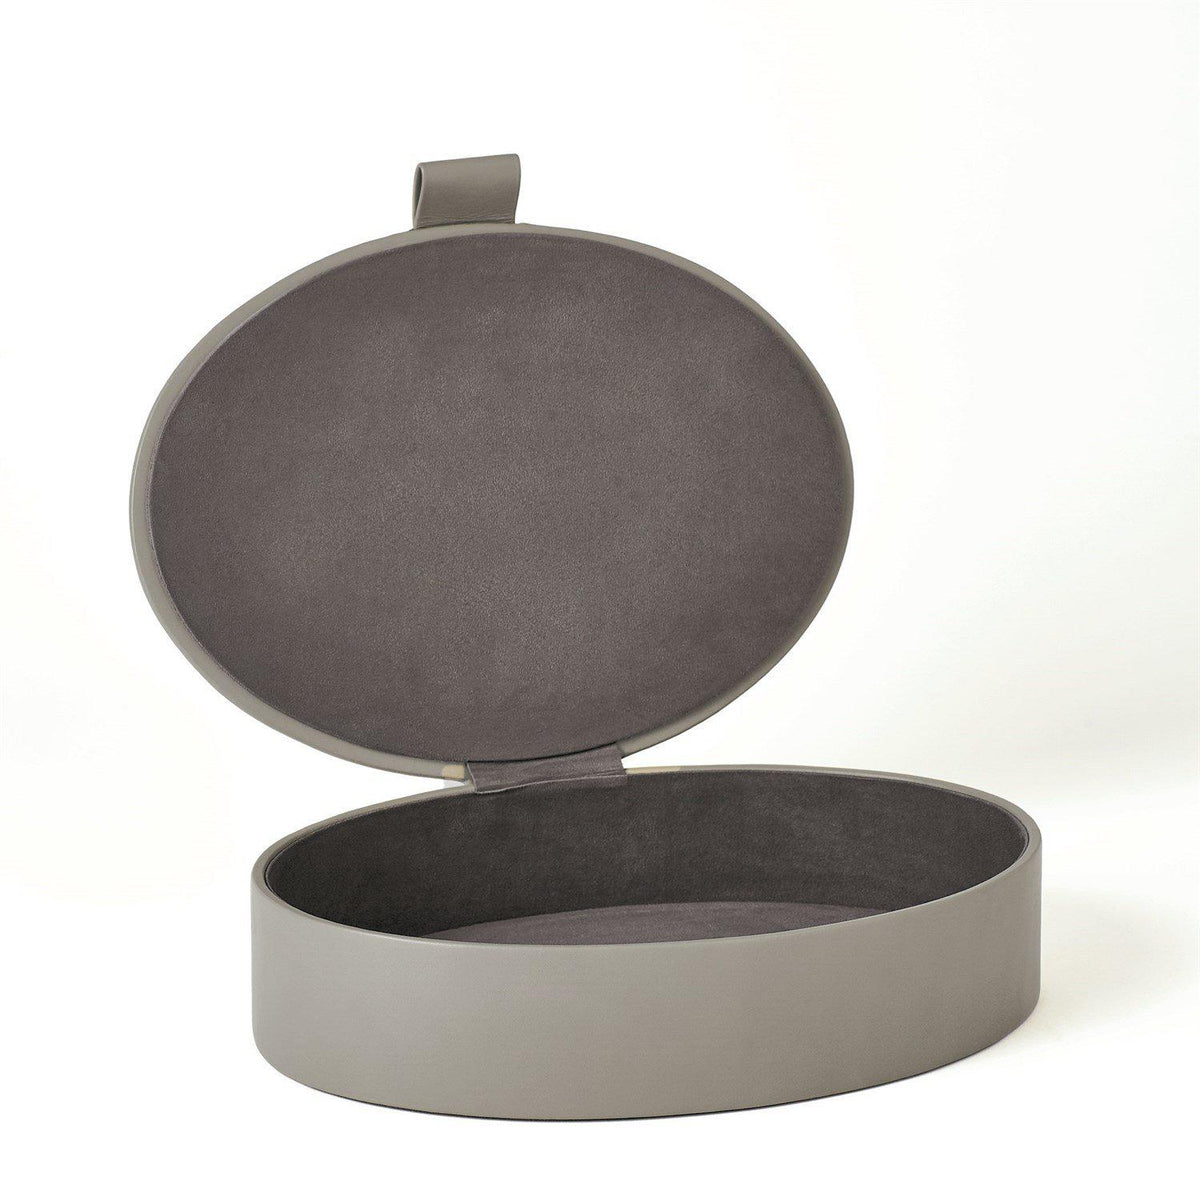 Signature Oval Leather Box-Global Views-Boxes-Artistic Elements